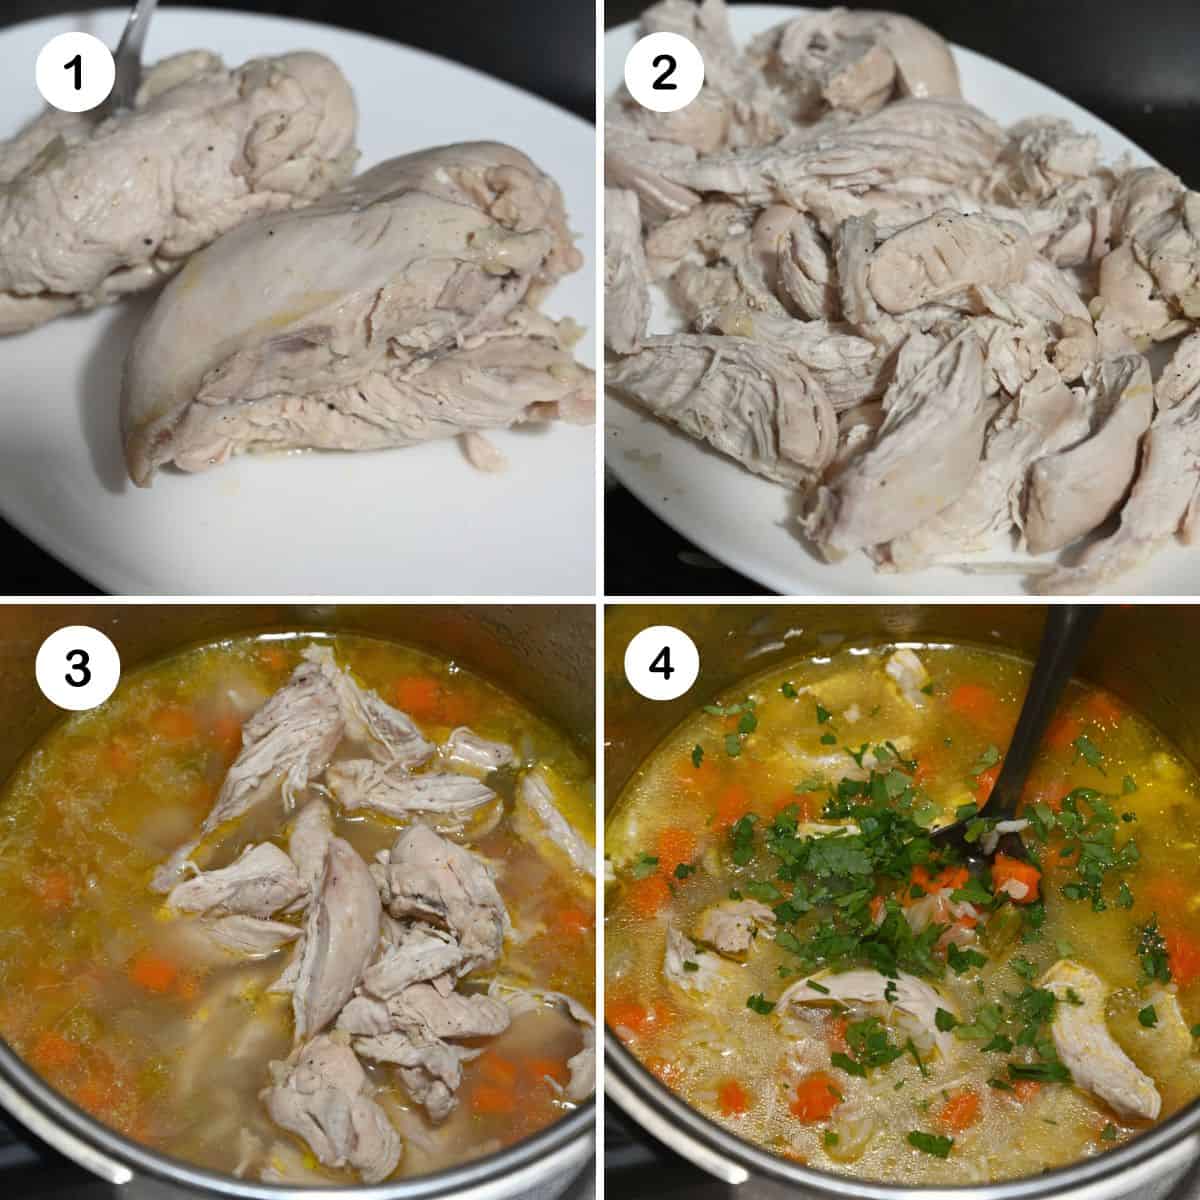 Steps for shredding chicken and adding it to soup